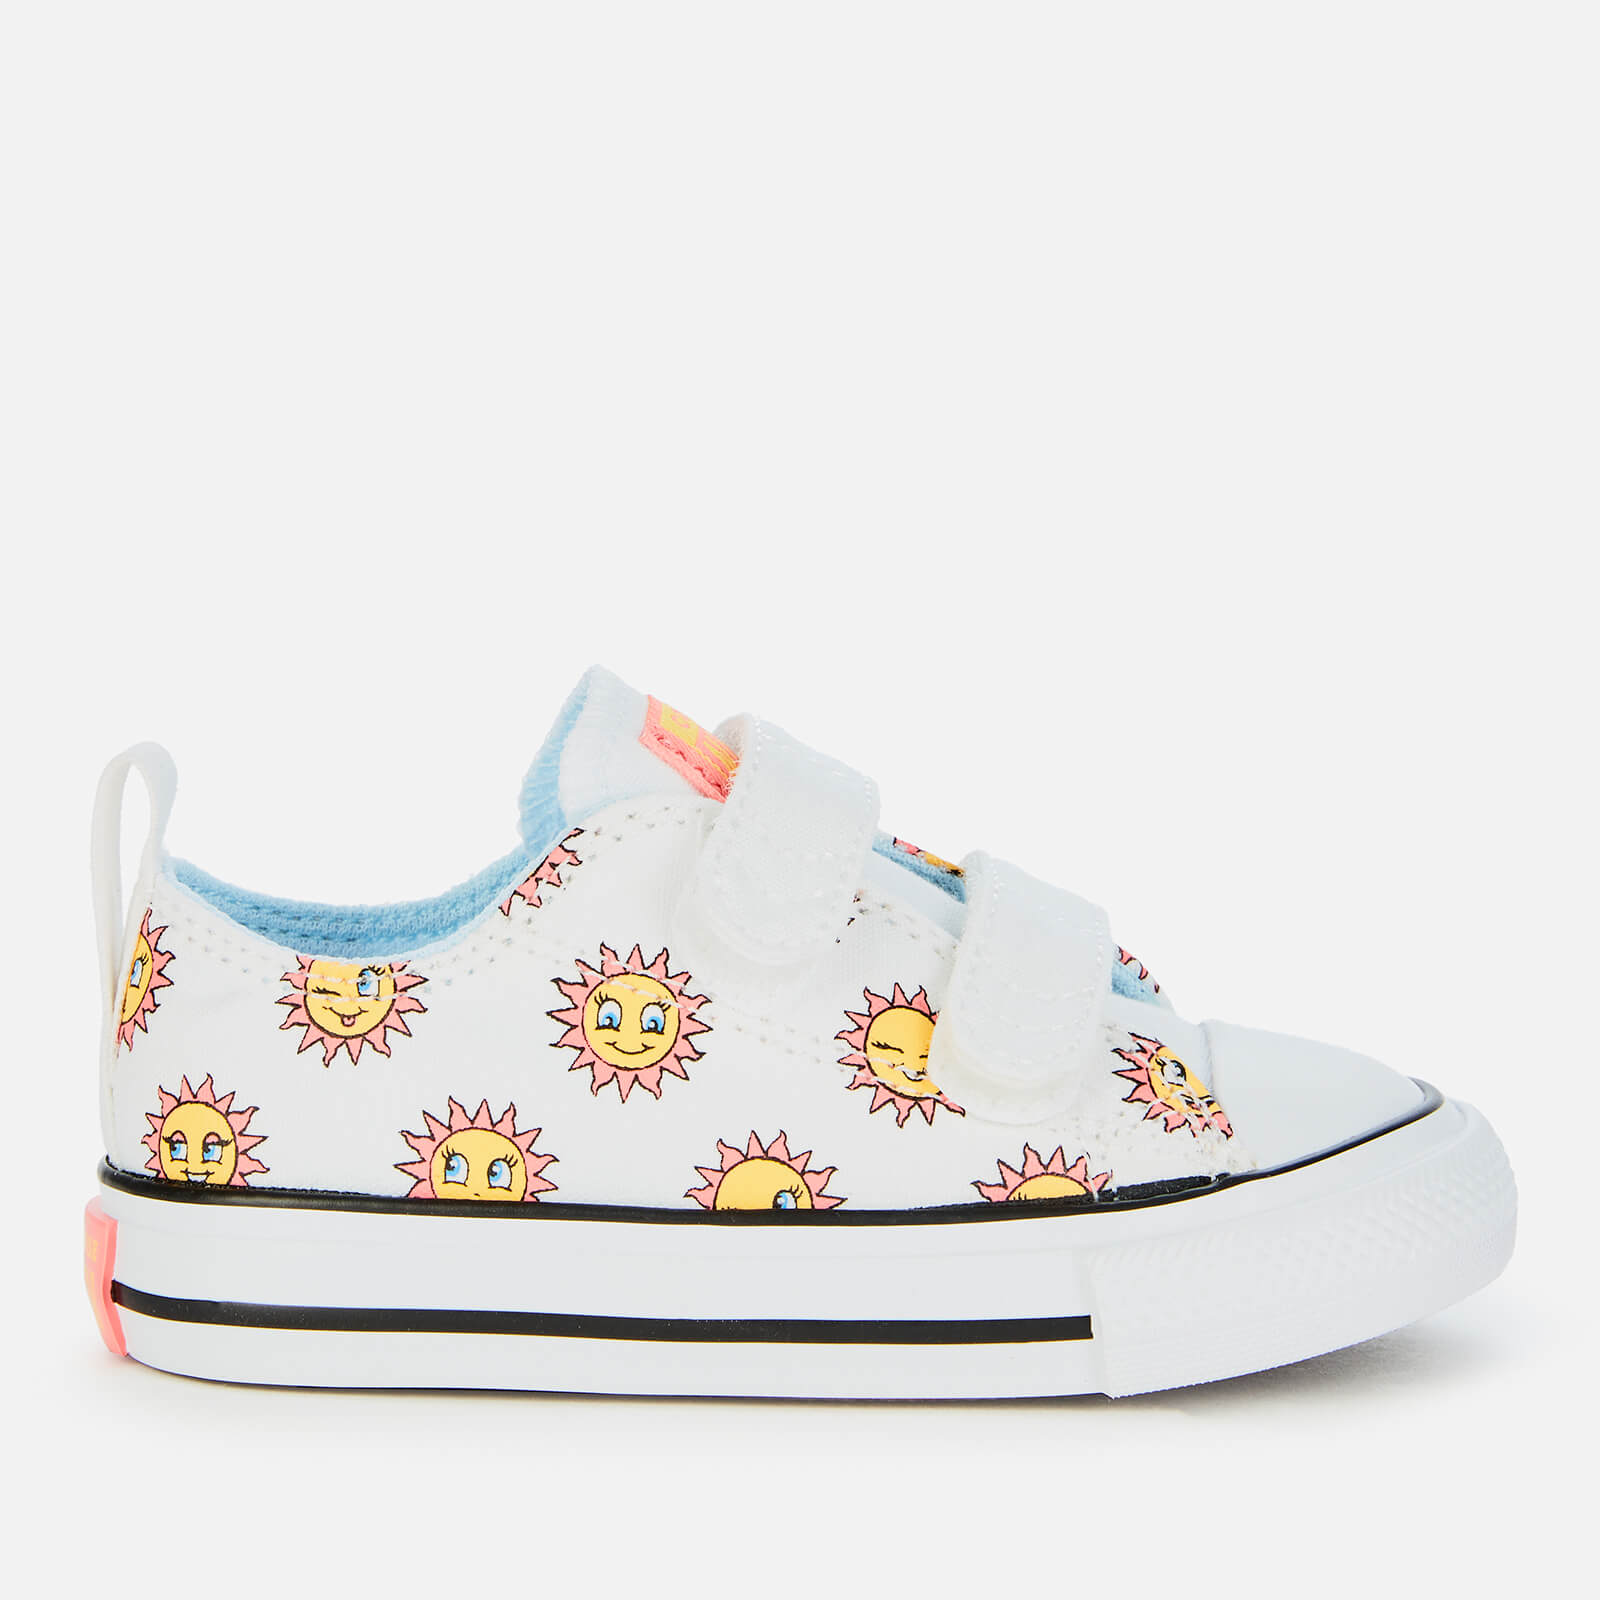 Converse Toddlers' Chase The Sun Chuck Taylor All Star Velcro Ox Trainers - White/Citron Pulse/Chambray Blue - UK 4 Toddler